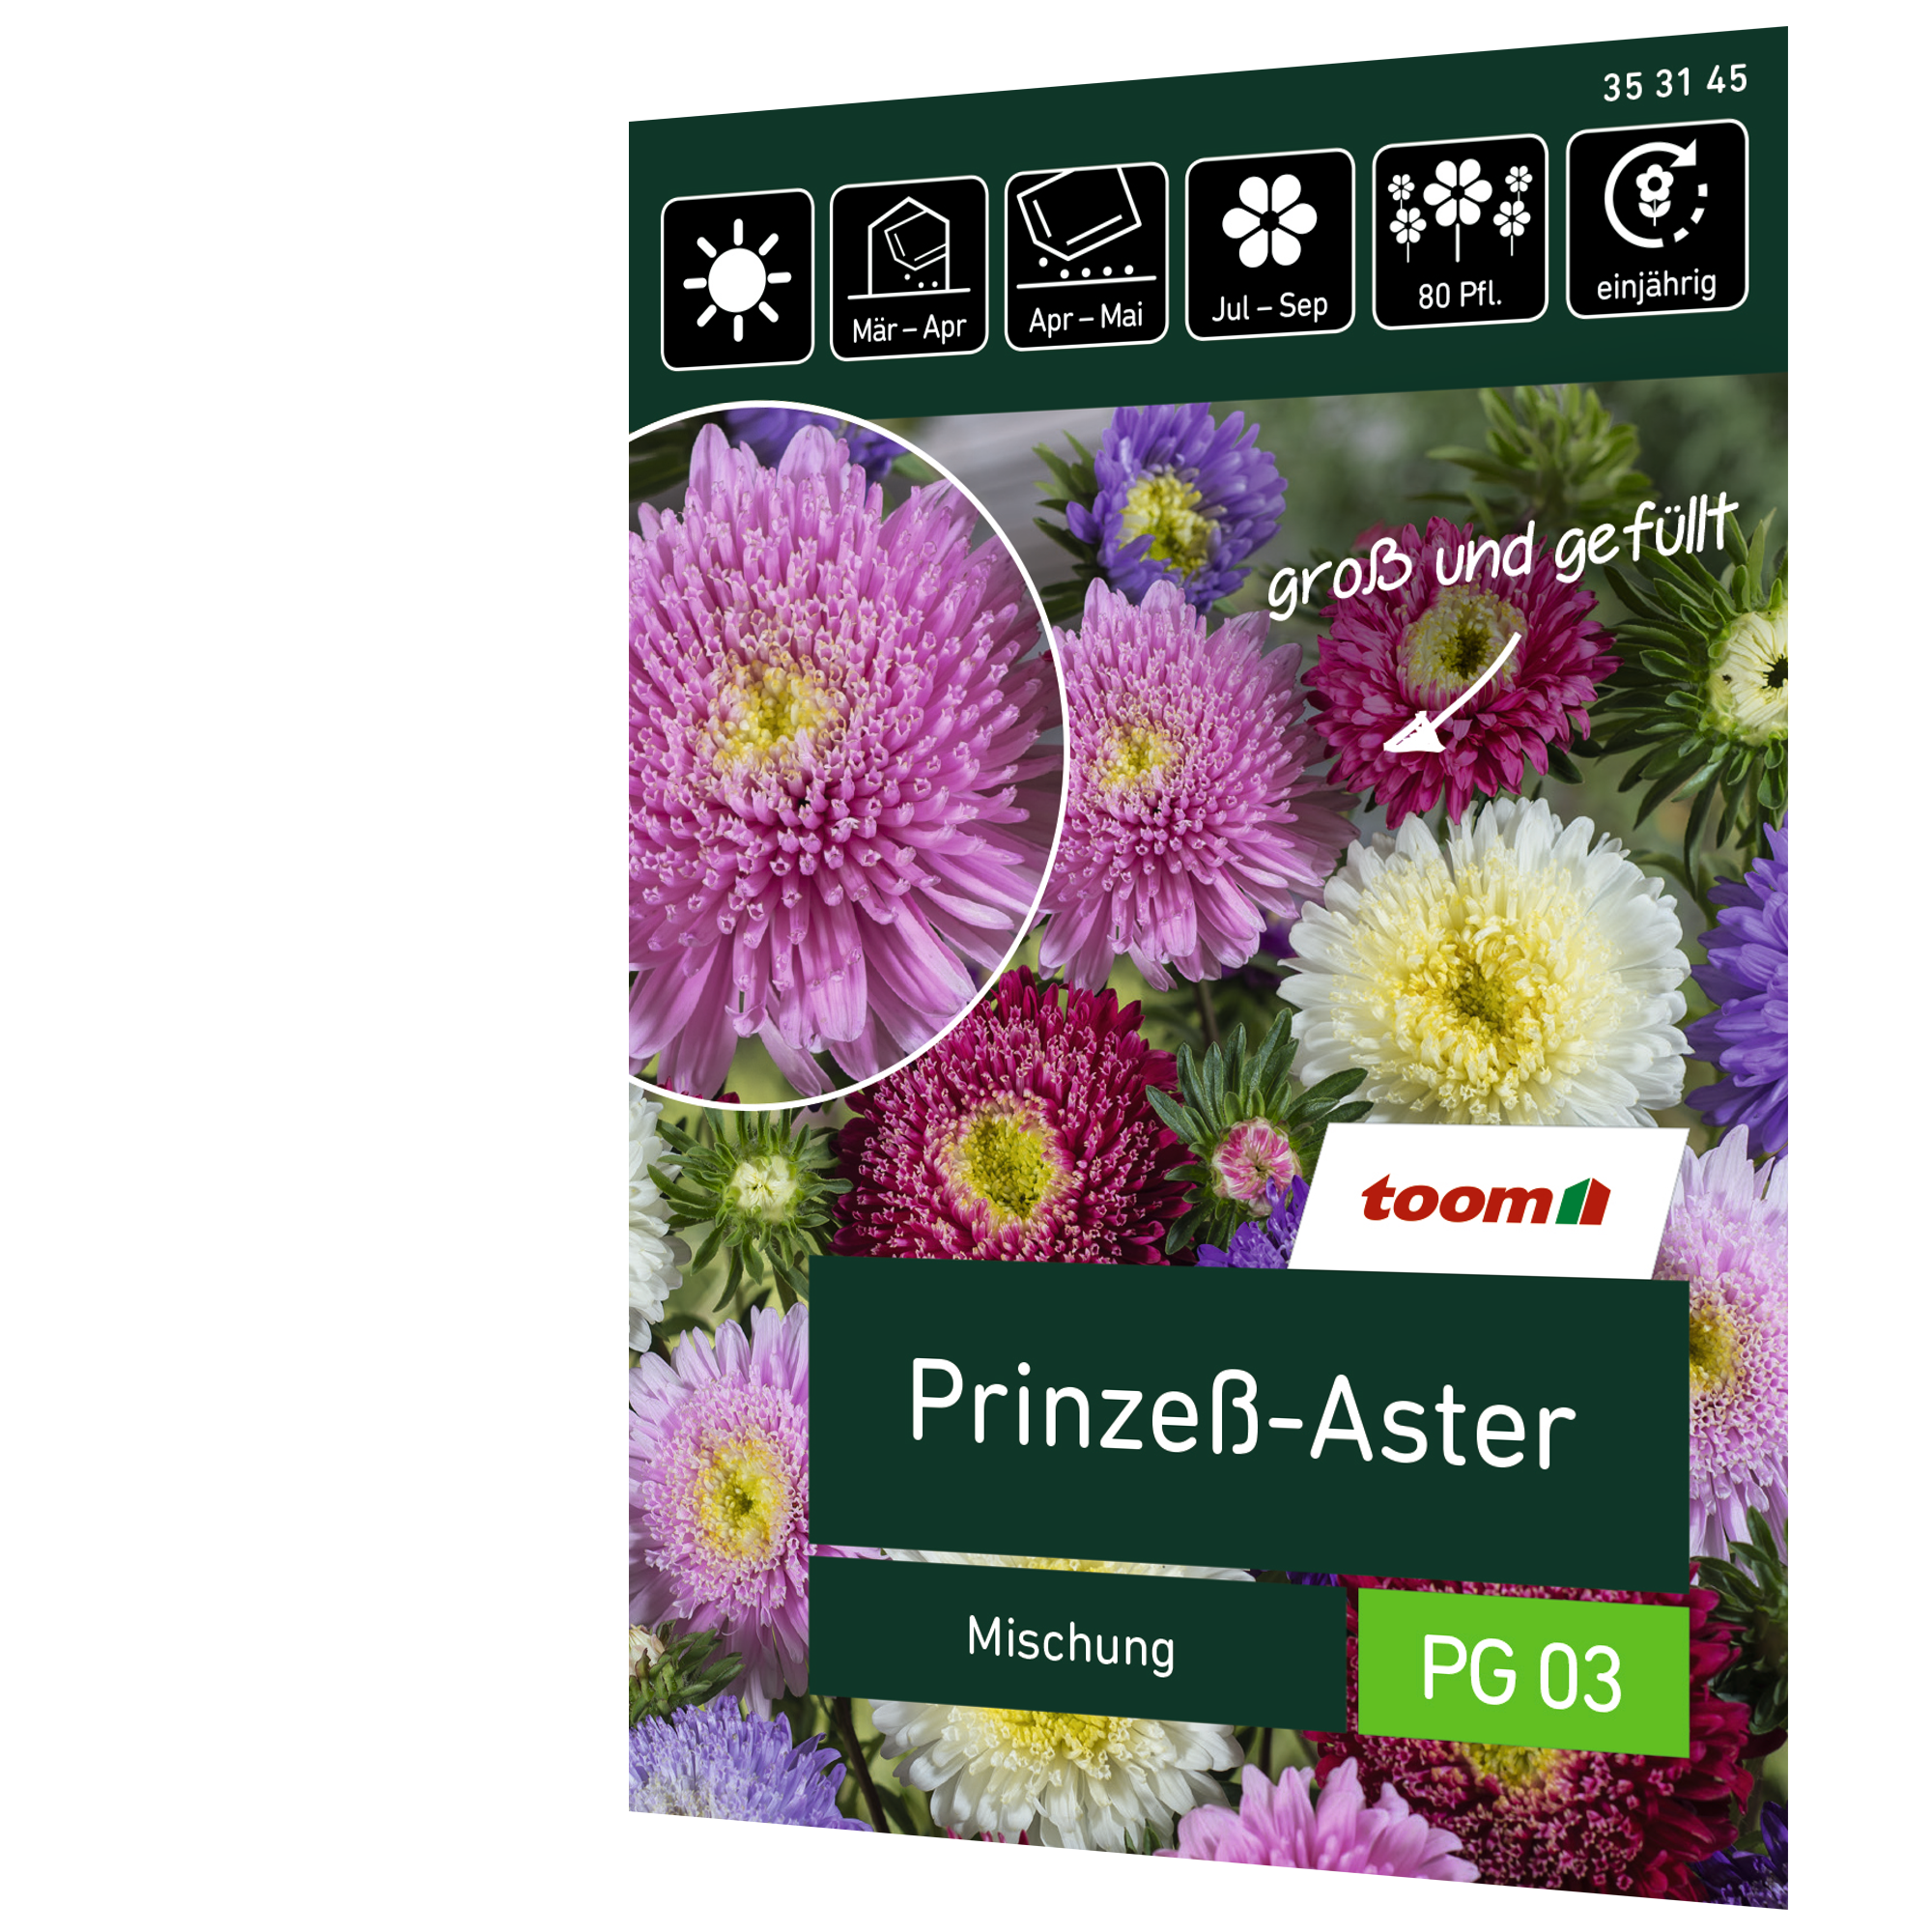 Prinzess-Aster 'Mischung' + product picture